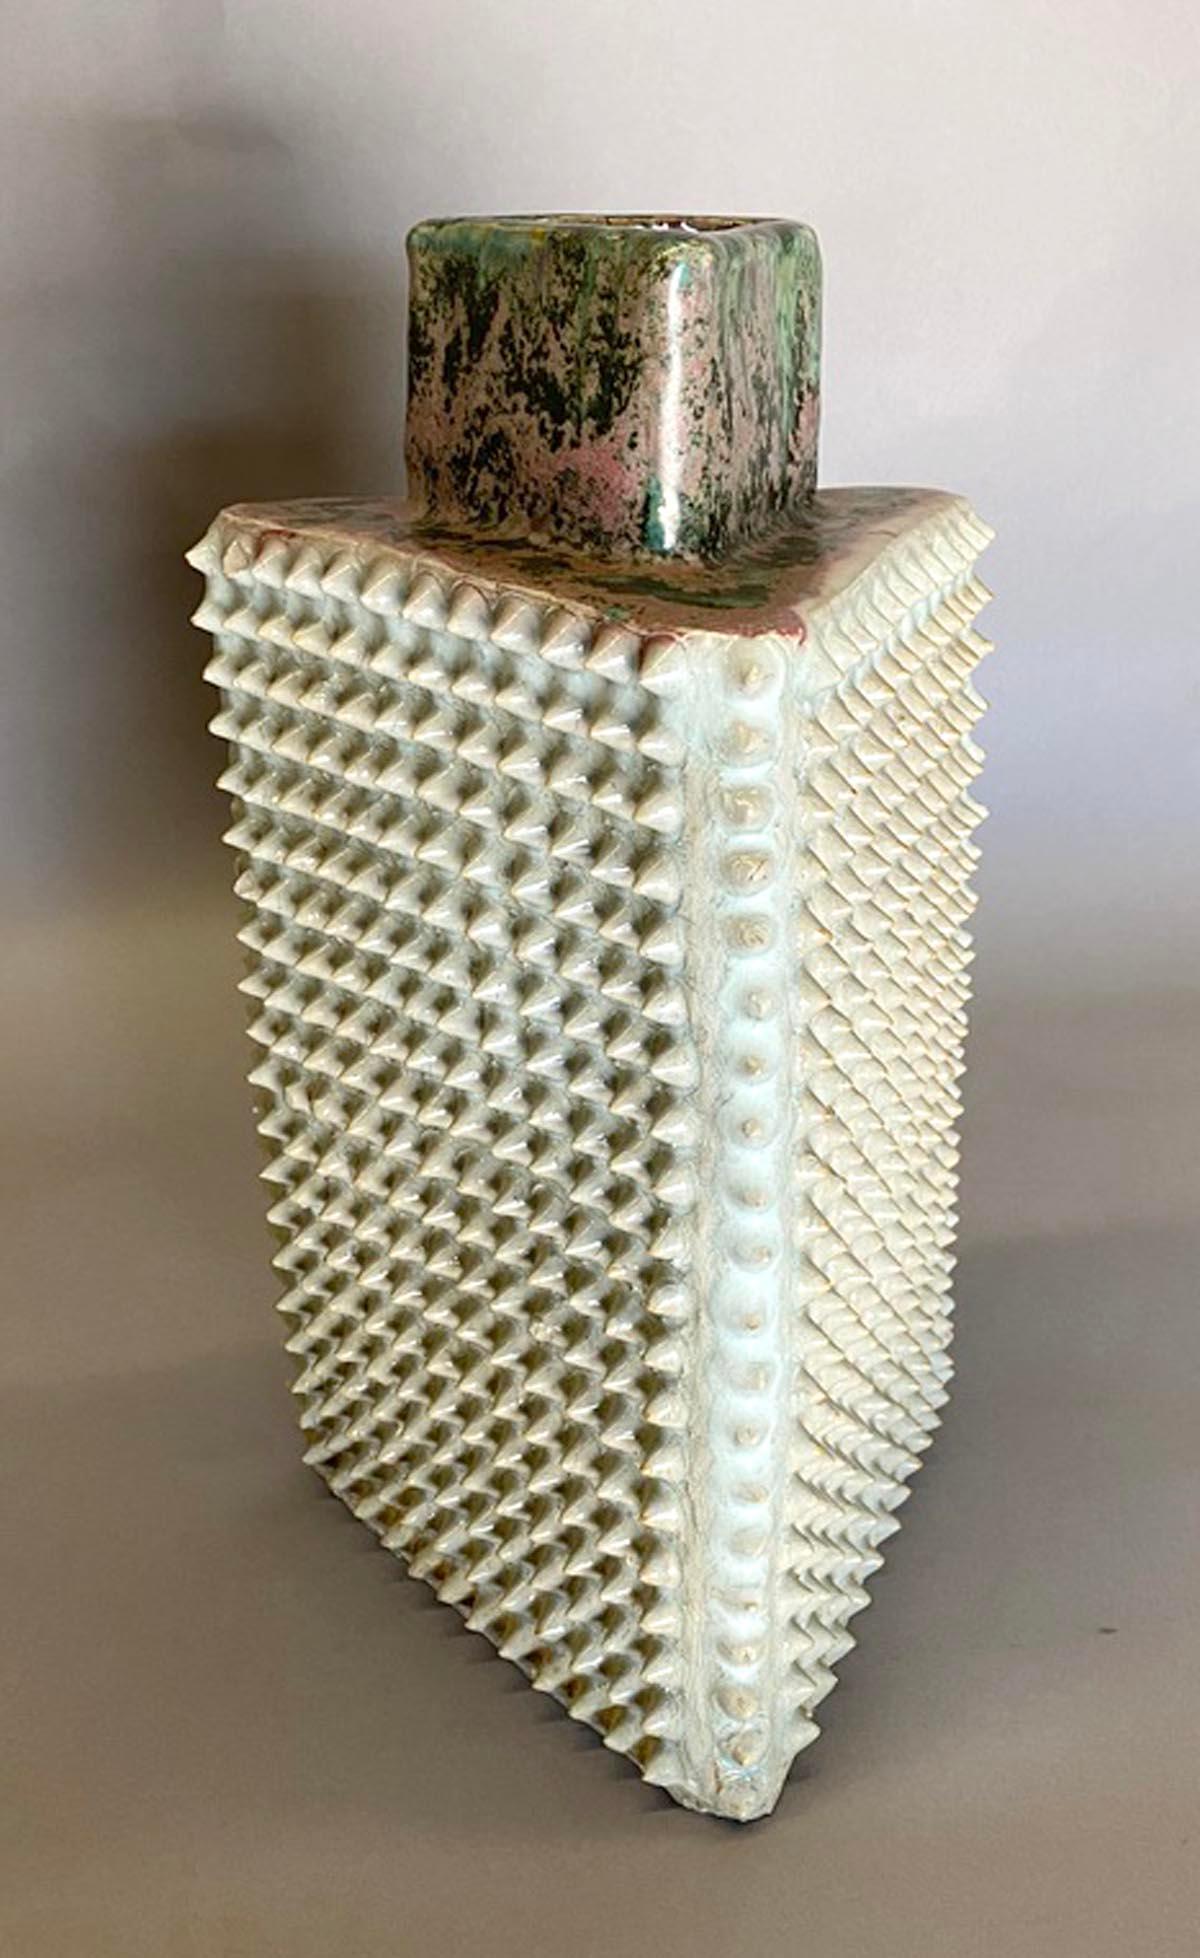 20th c. Japanese ceramic with Valentino style studs! Grey, green and pink glaze. A few tiny chips but otherwise in great condition.